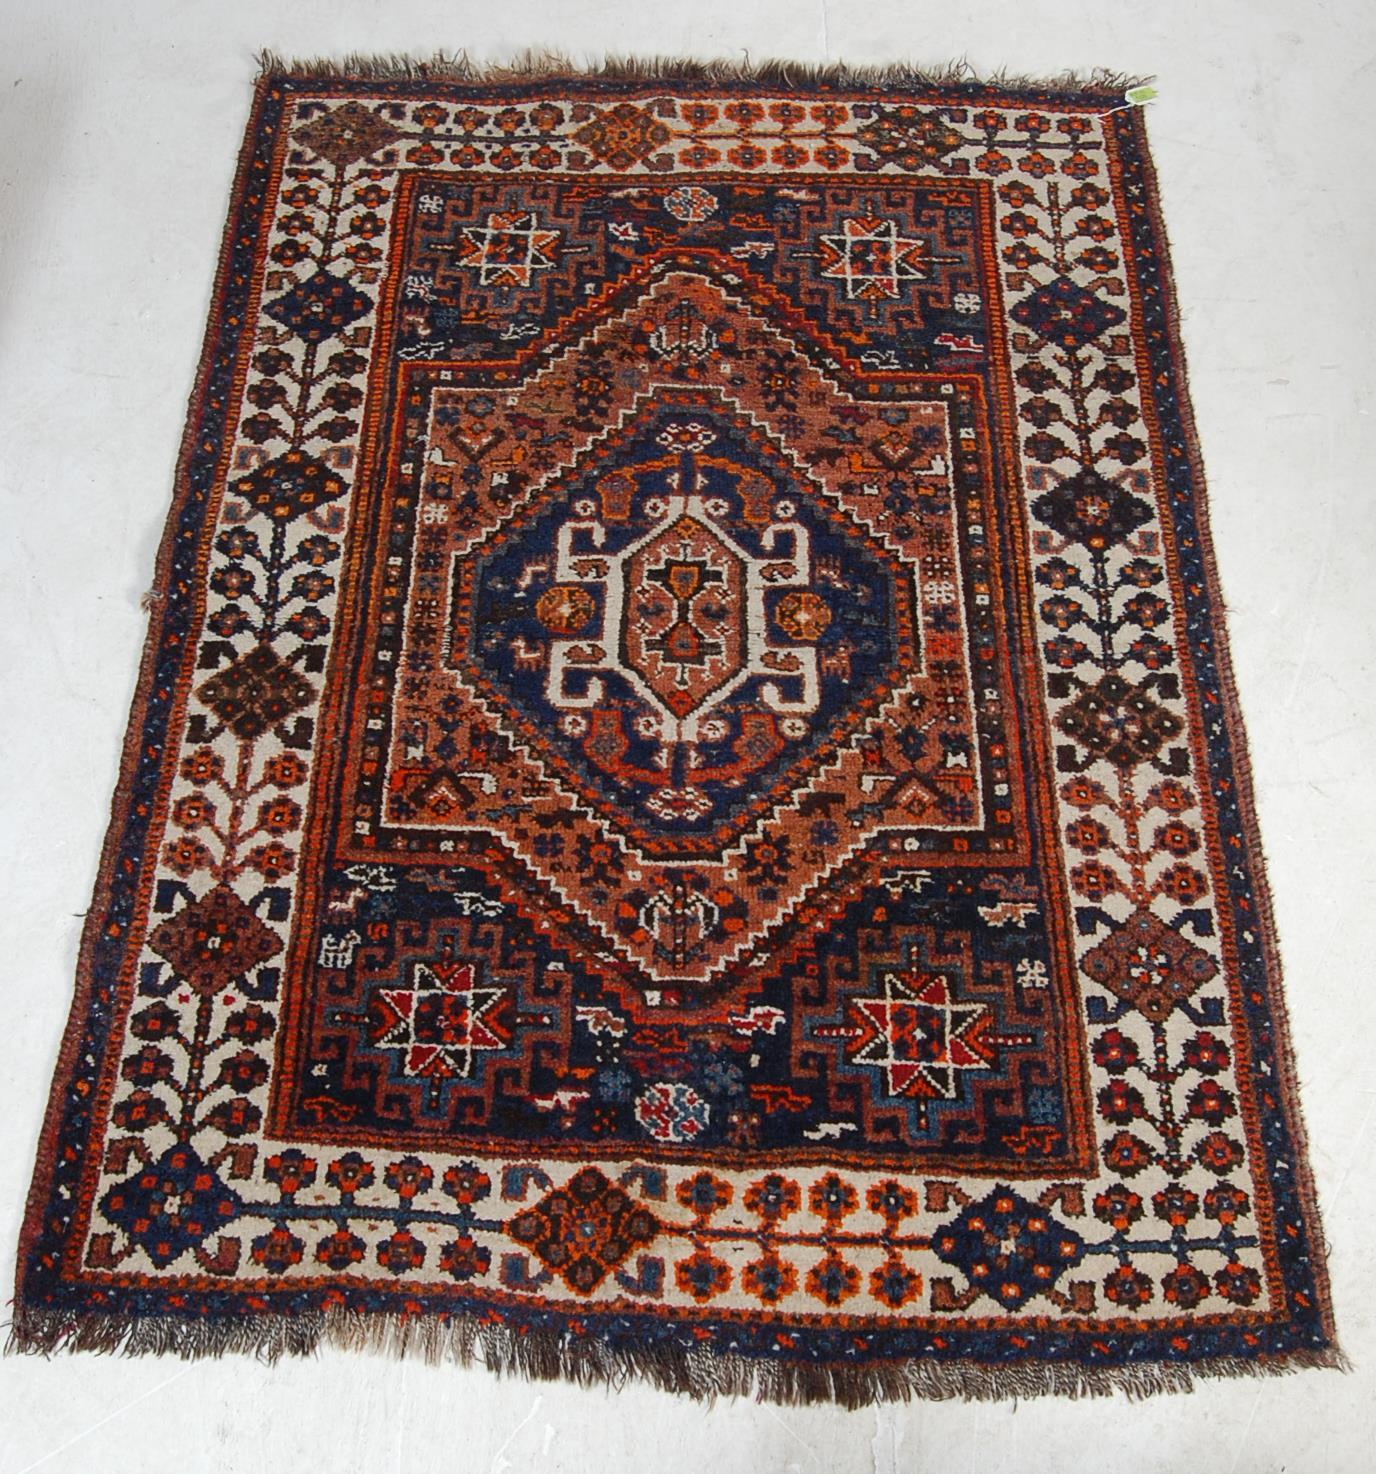 EARLY 20TH CENTURY NATURAL DYED AND HAND-WOVEN WOOL AFGHAN RUG / CARPET